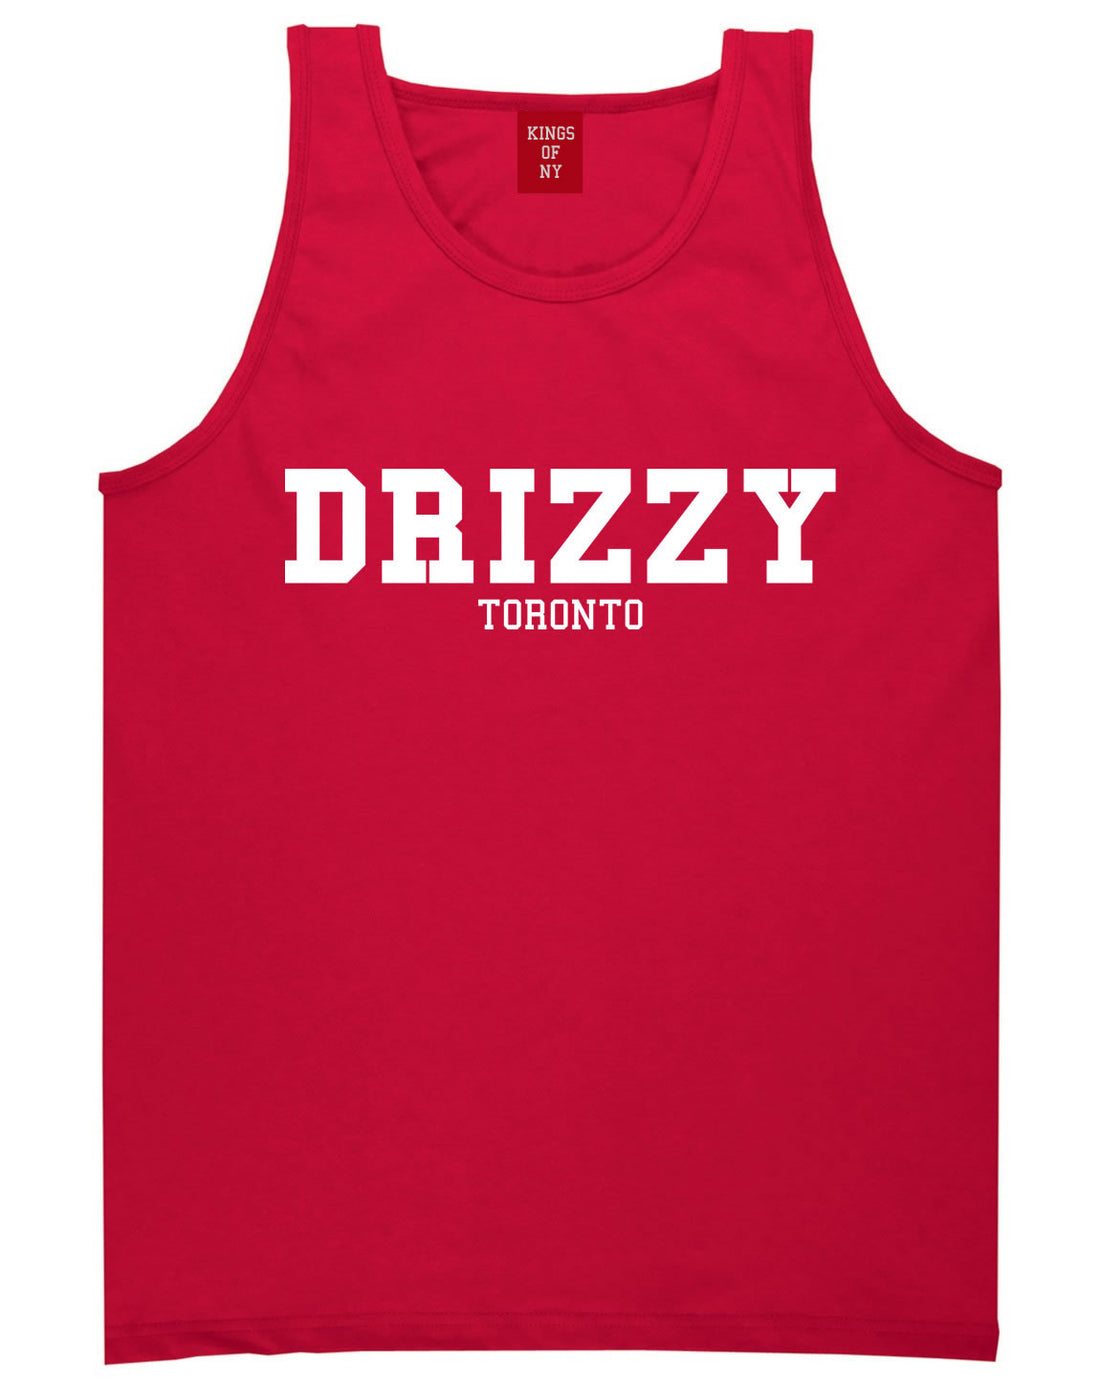 Drizzy Toronto Canada Tank Top in Red by Kings Of NY